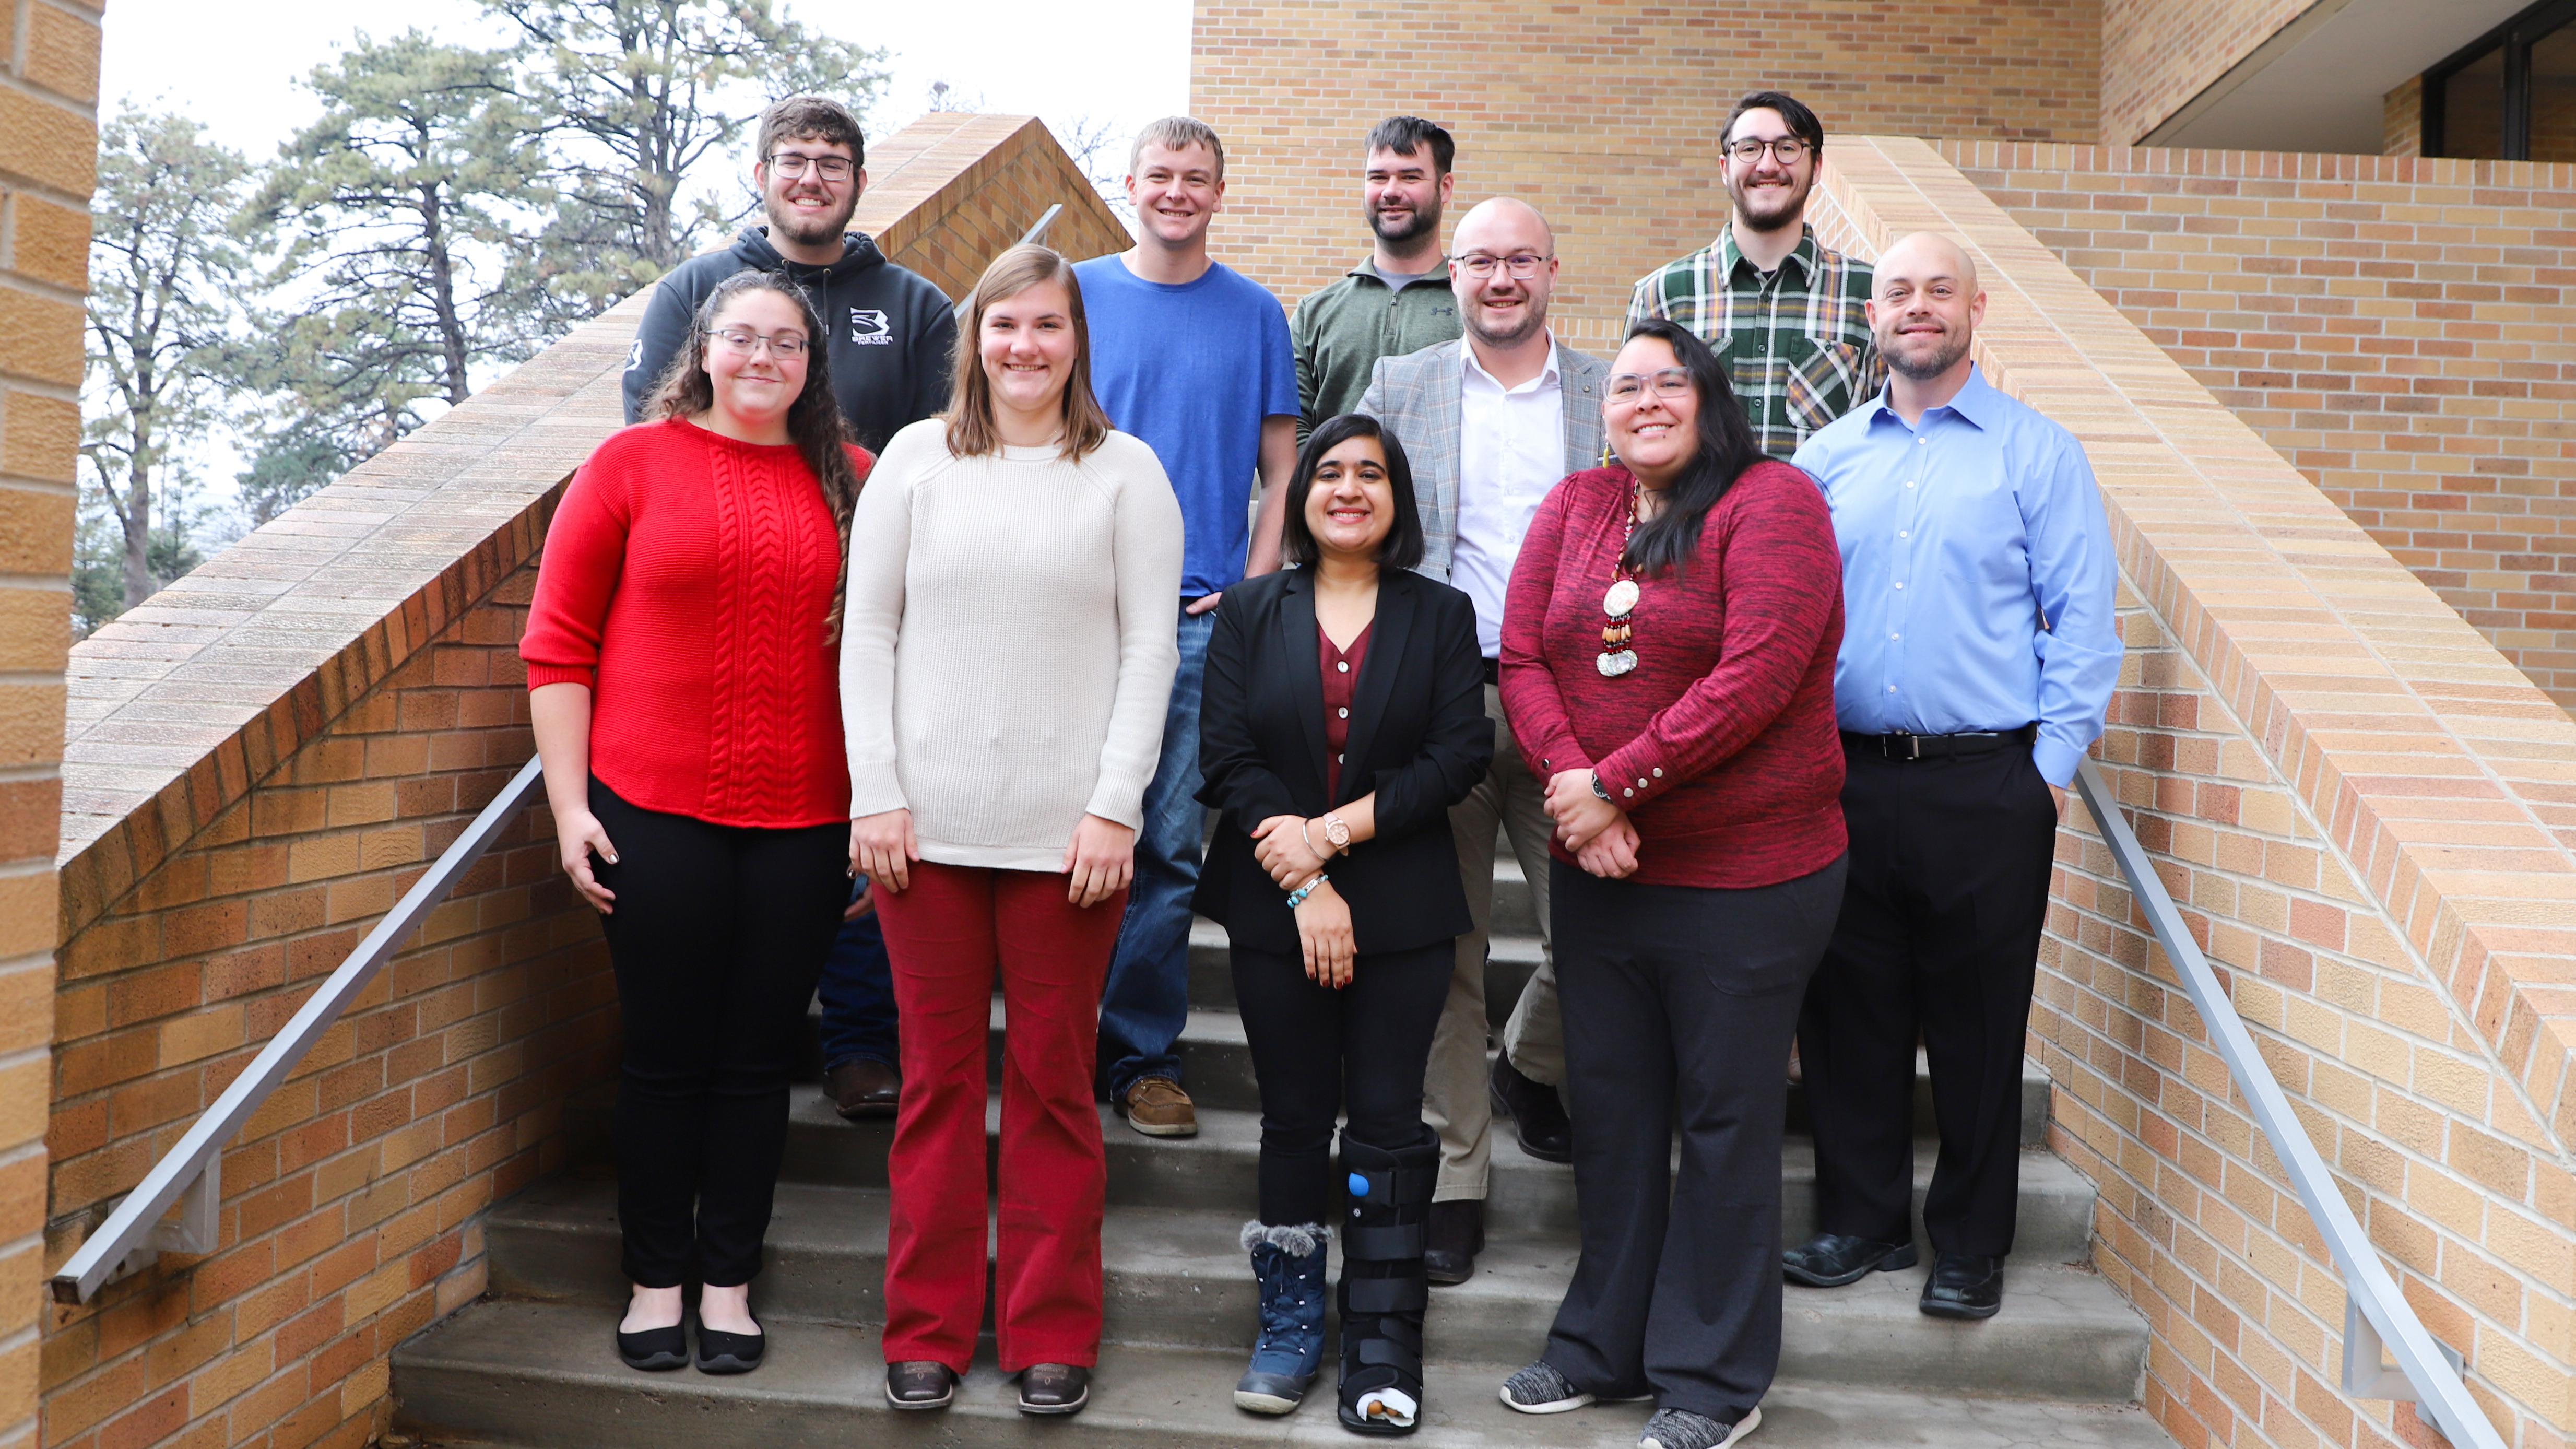 Students who attended the department reception included Seth Brewer (back row, from left), Matt Mittman, Nicholas Kinzer, Milos Zaric, Jacob Hillis, Lance Gunderson, Emily Hanson (front row, from left), Brinn Space, Ramandeep Kaur and Kahheetah Barnoskie.